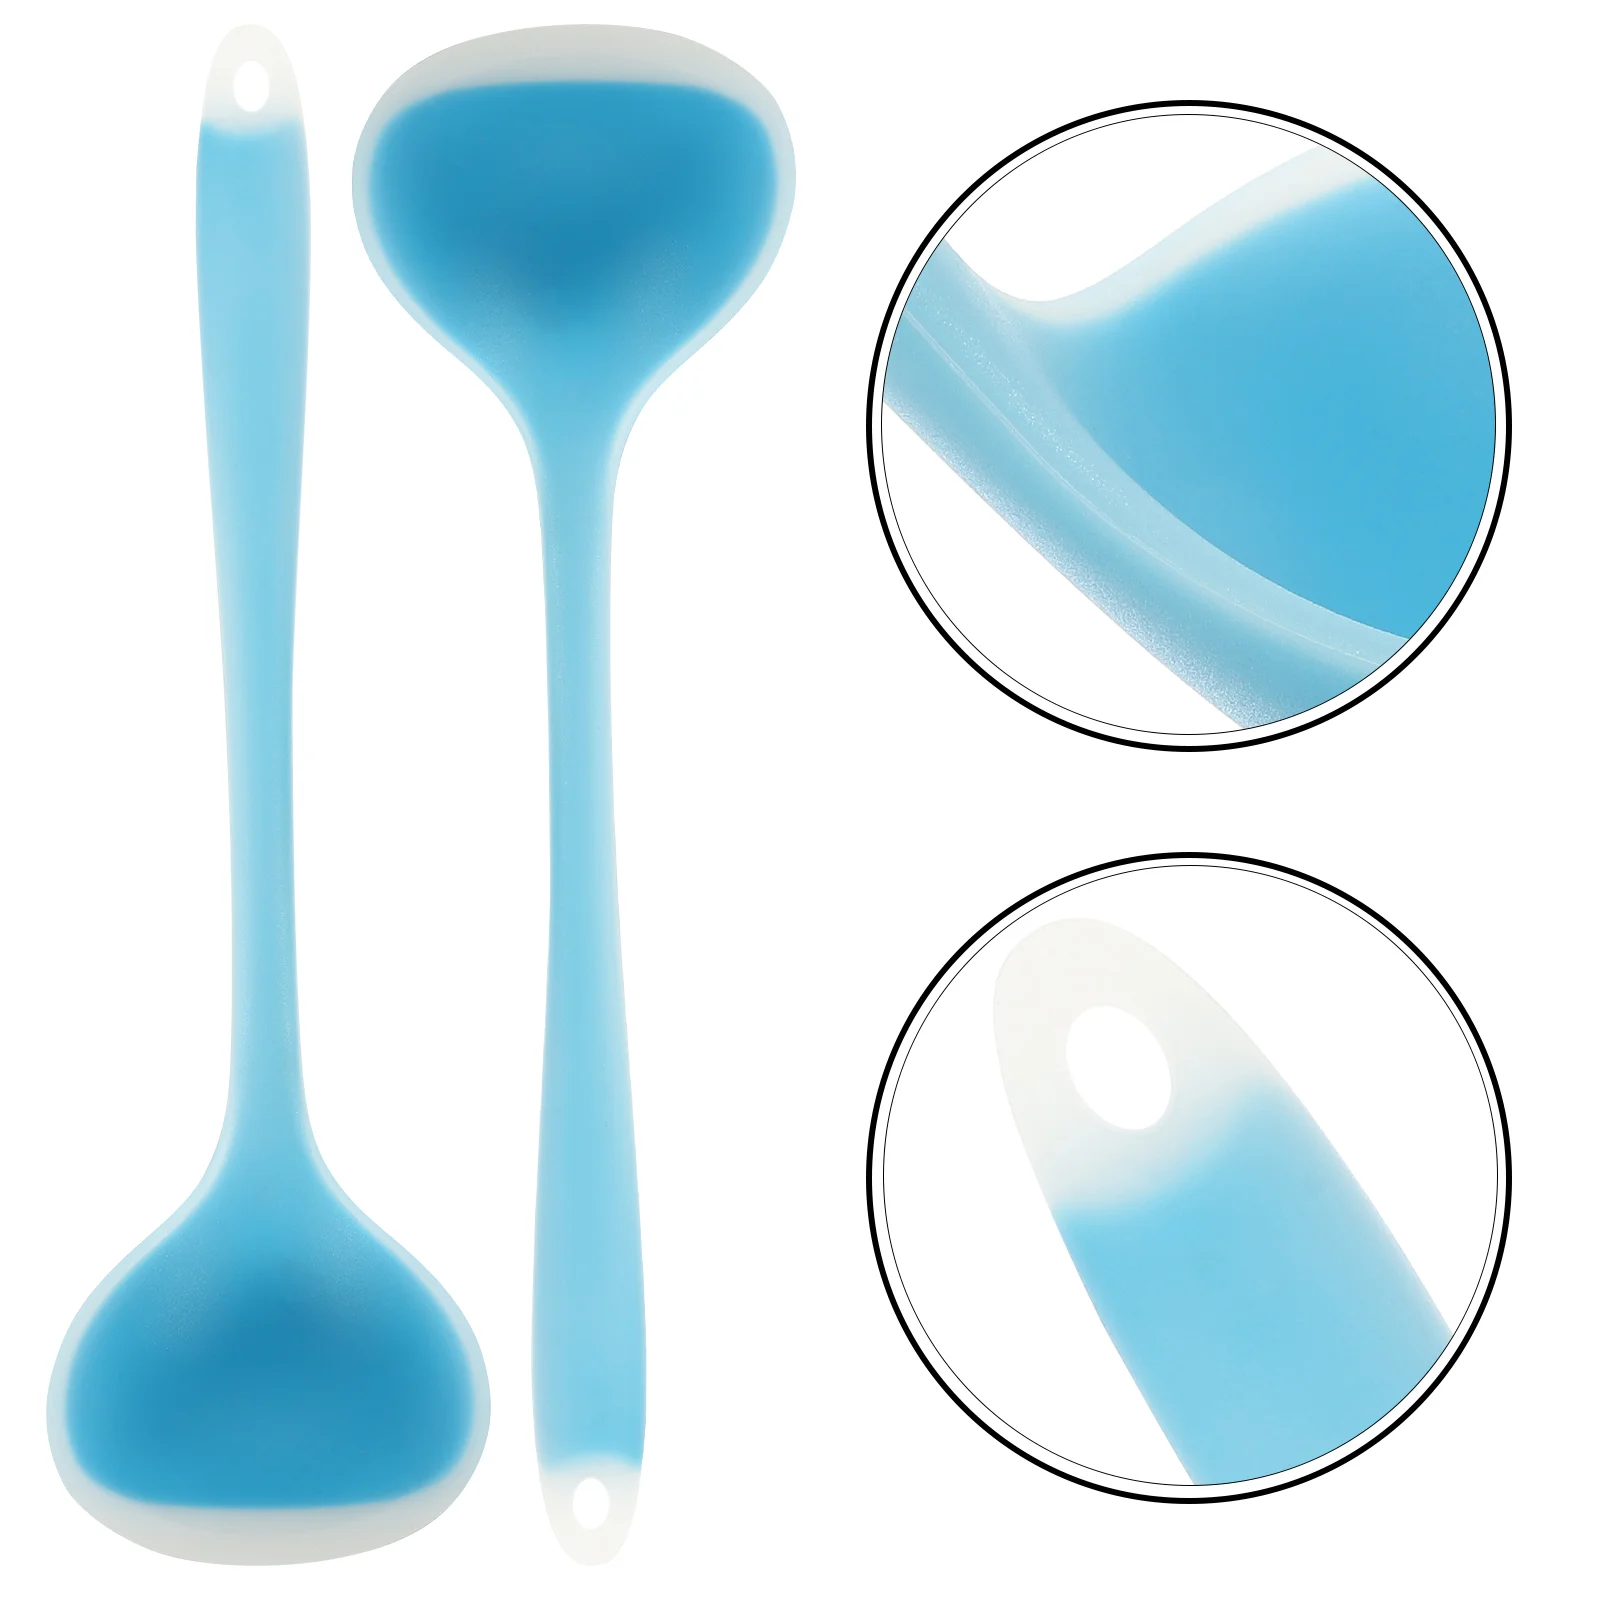 

Ladle Spoon Serving Silicone Kitchen Cooking Scoop Soup Sauce Stir Utensils Ladlesmixing Fry Gravy Pot Hot Spoons Rice Spaghetti